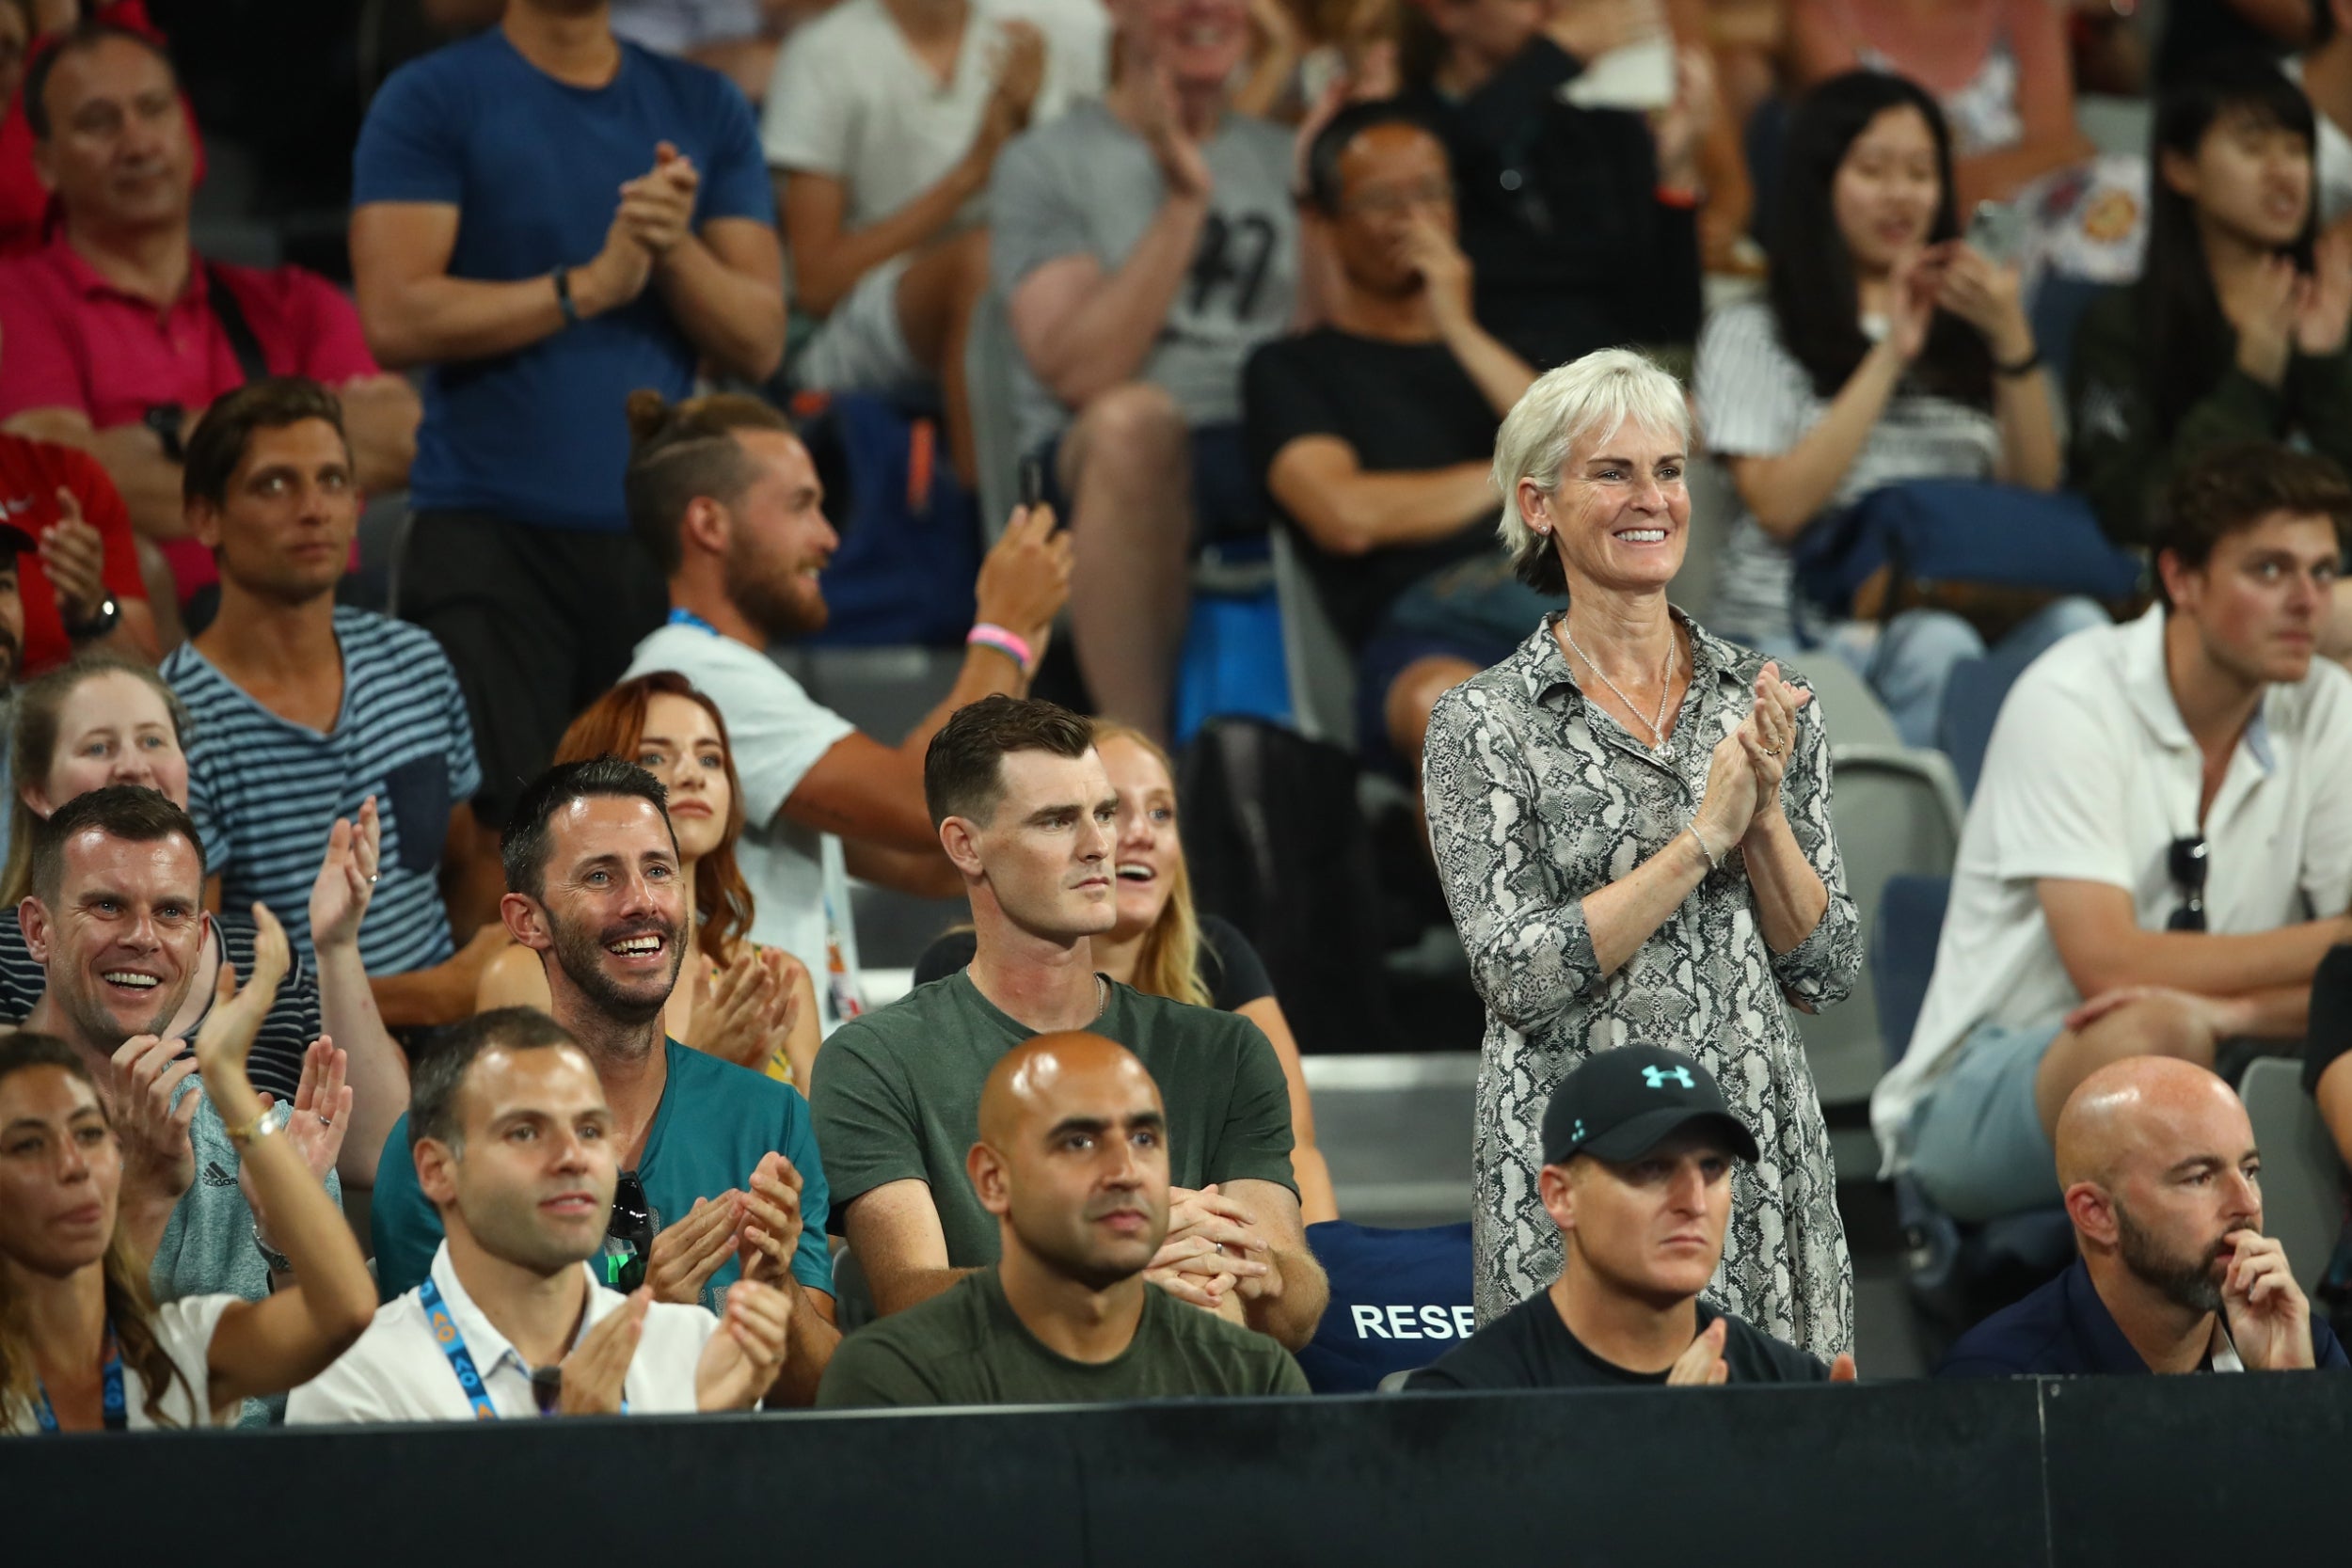 Judy Murray herself is unsure what decision her son will make regarding his hip injury